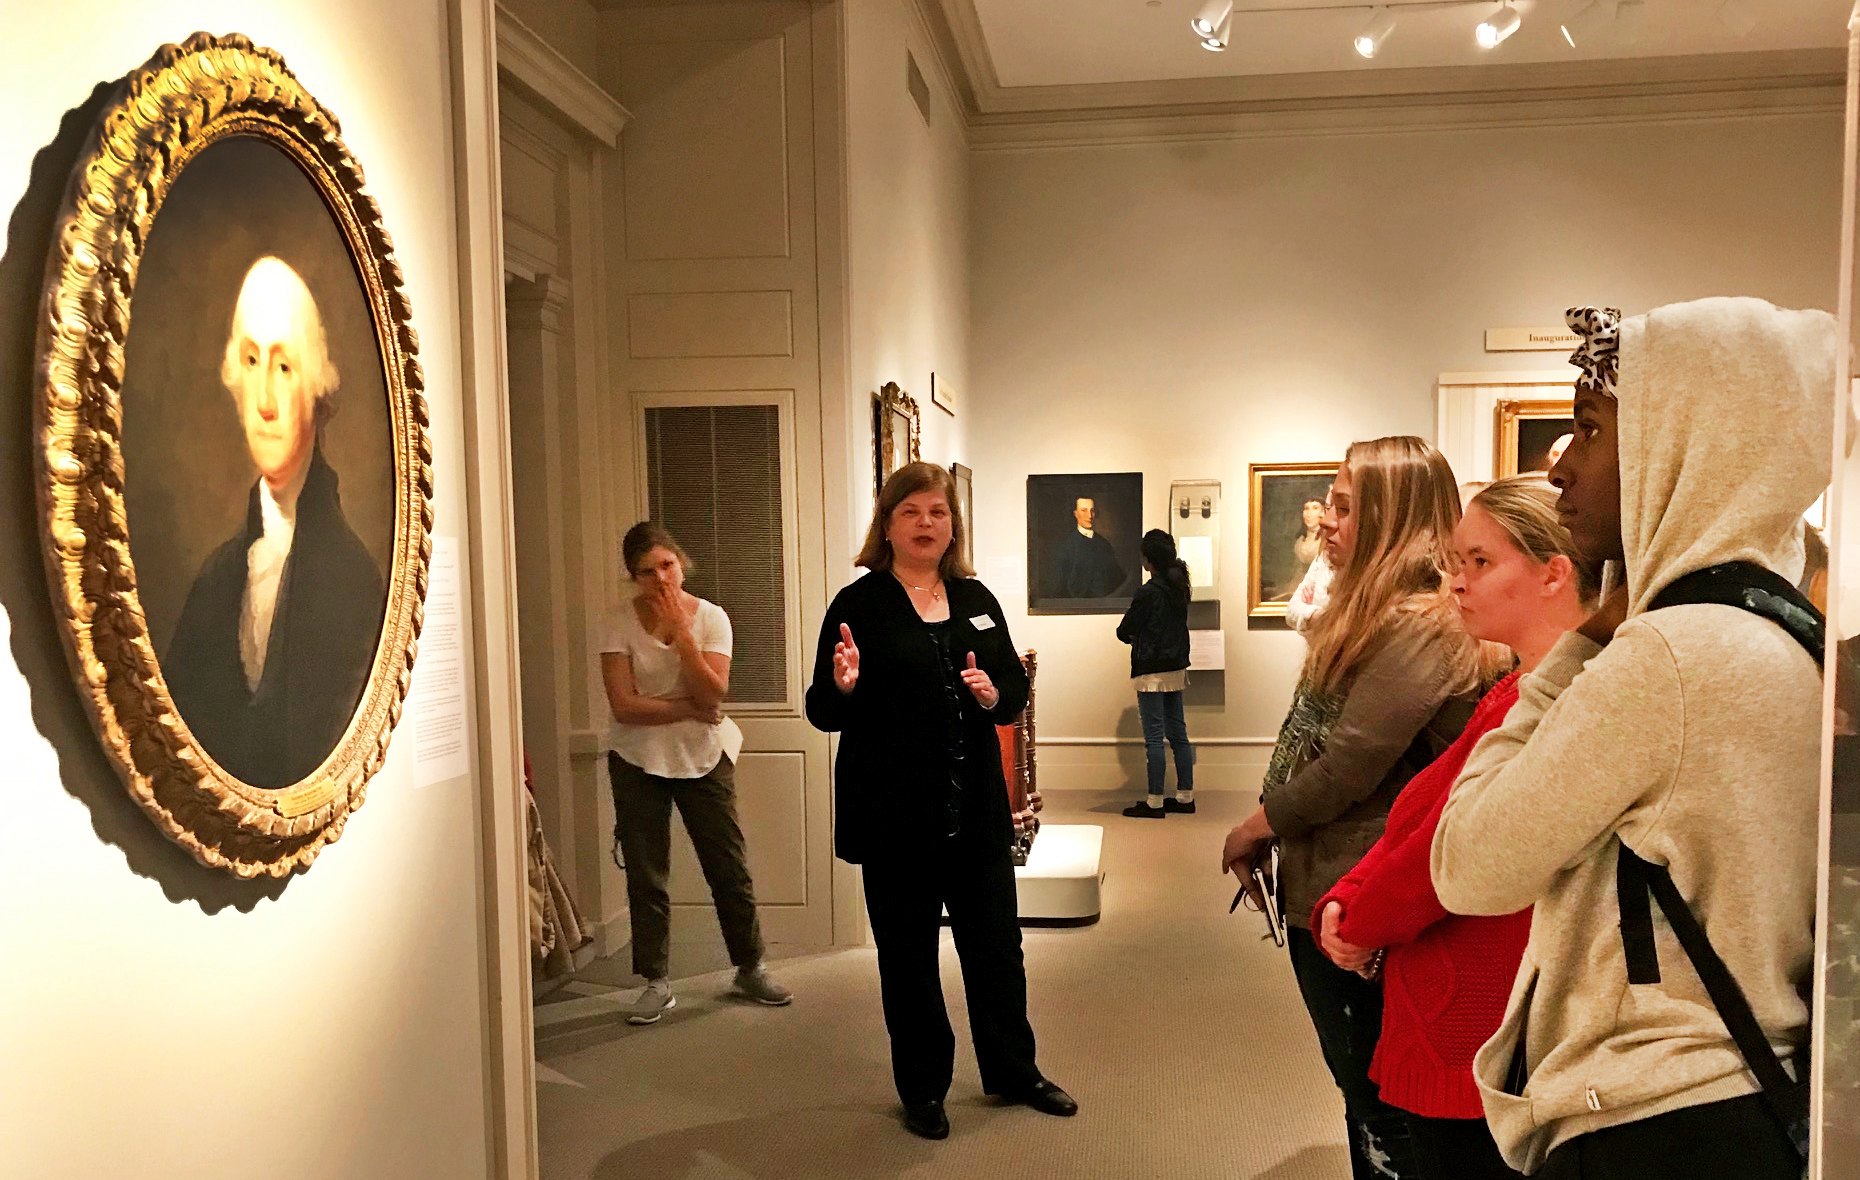 Students in the class “Women in Art from the Renaissance to Impressionism “ view the exhibition “The Schuyler Sisters and Their Circle” with curator Diane Shewchuk at the Albany Institute of History and Art in Fall 2019